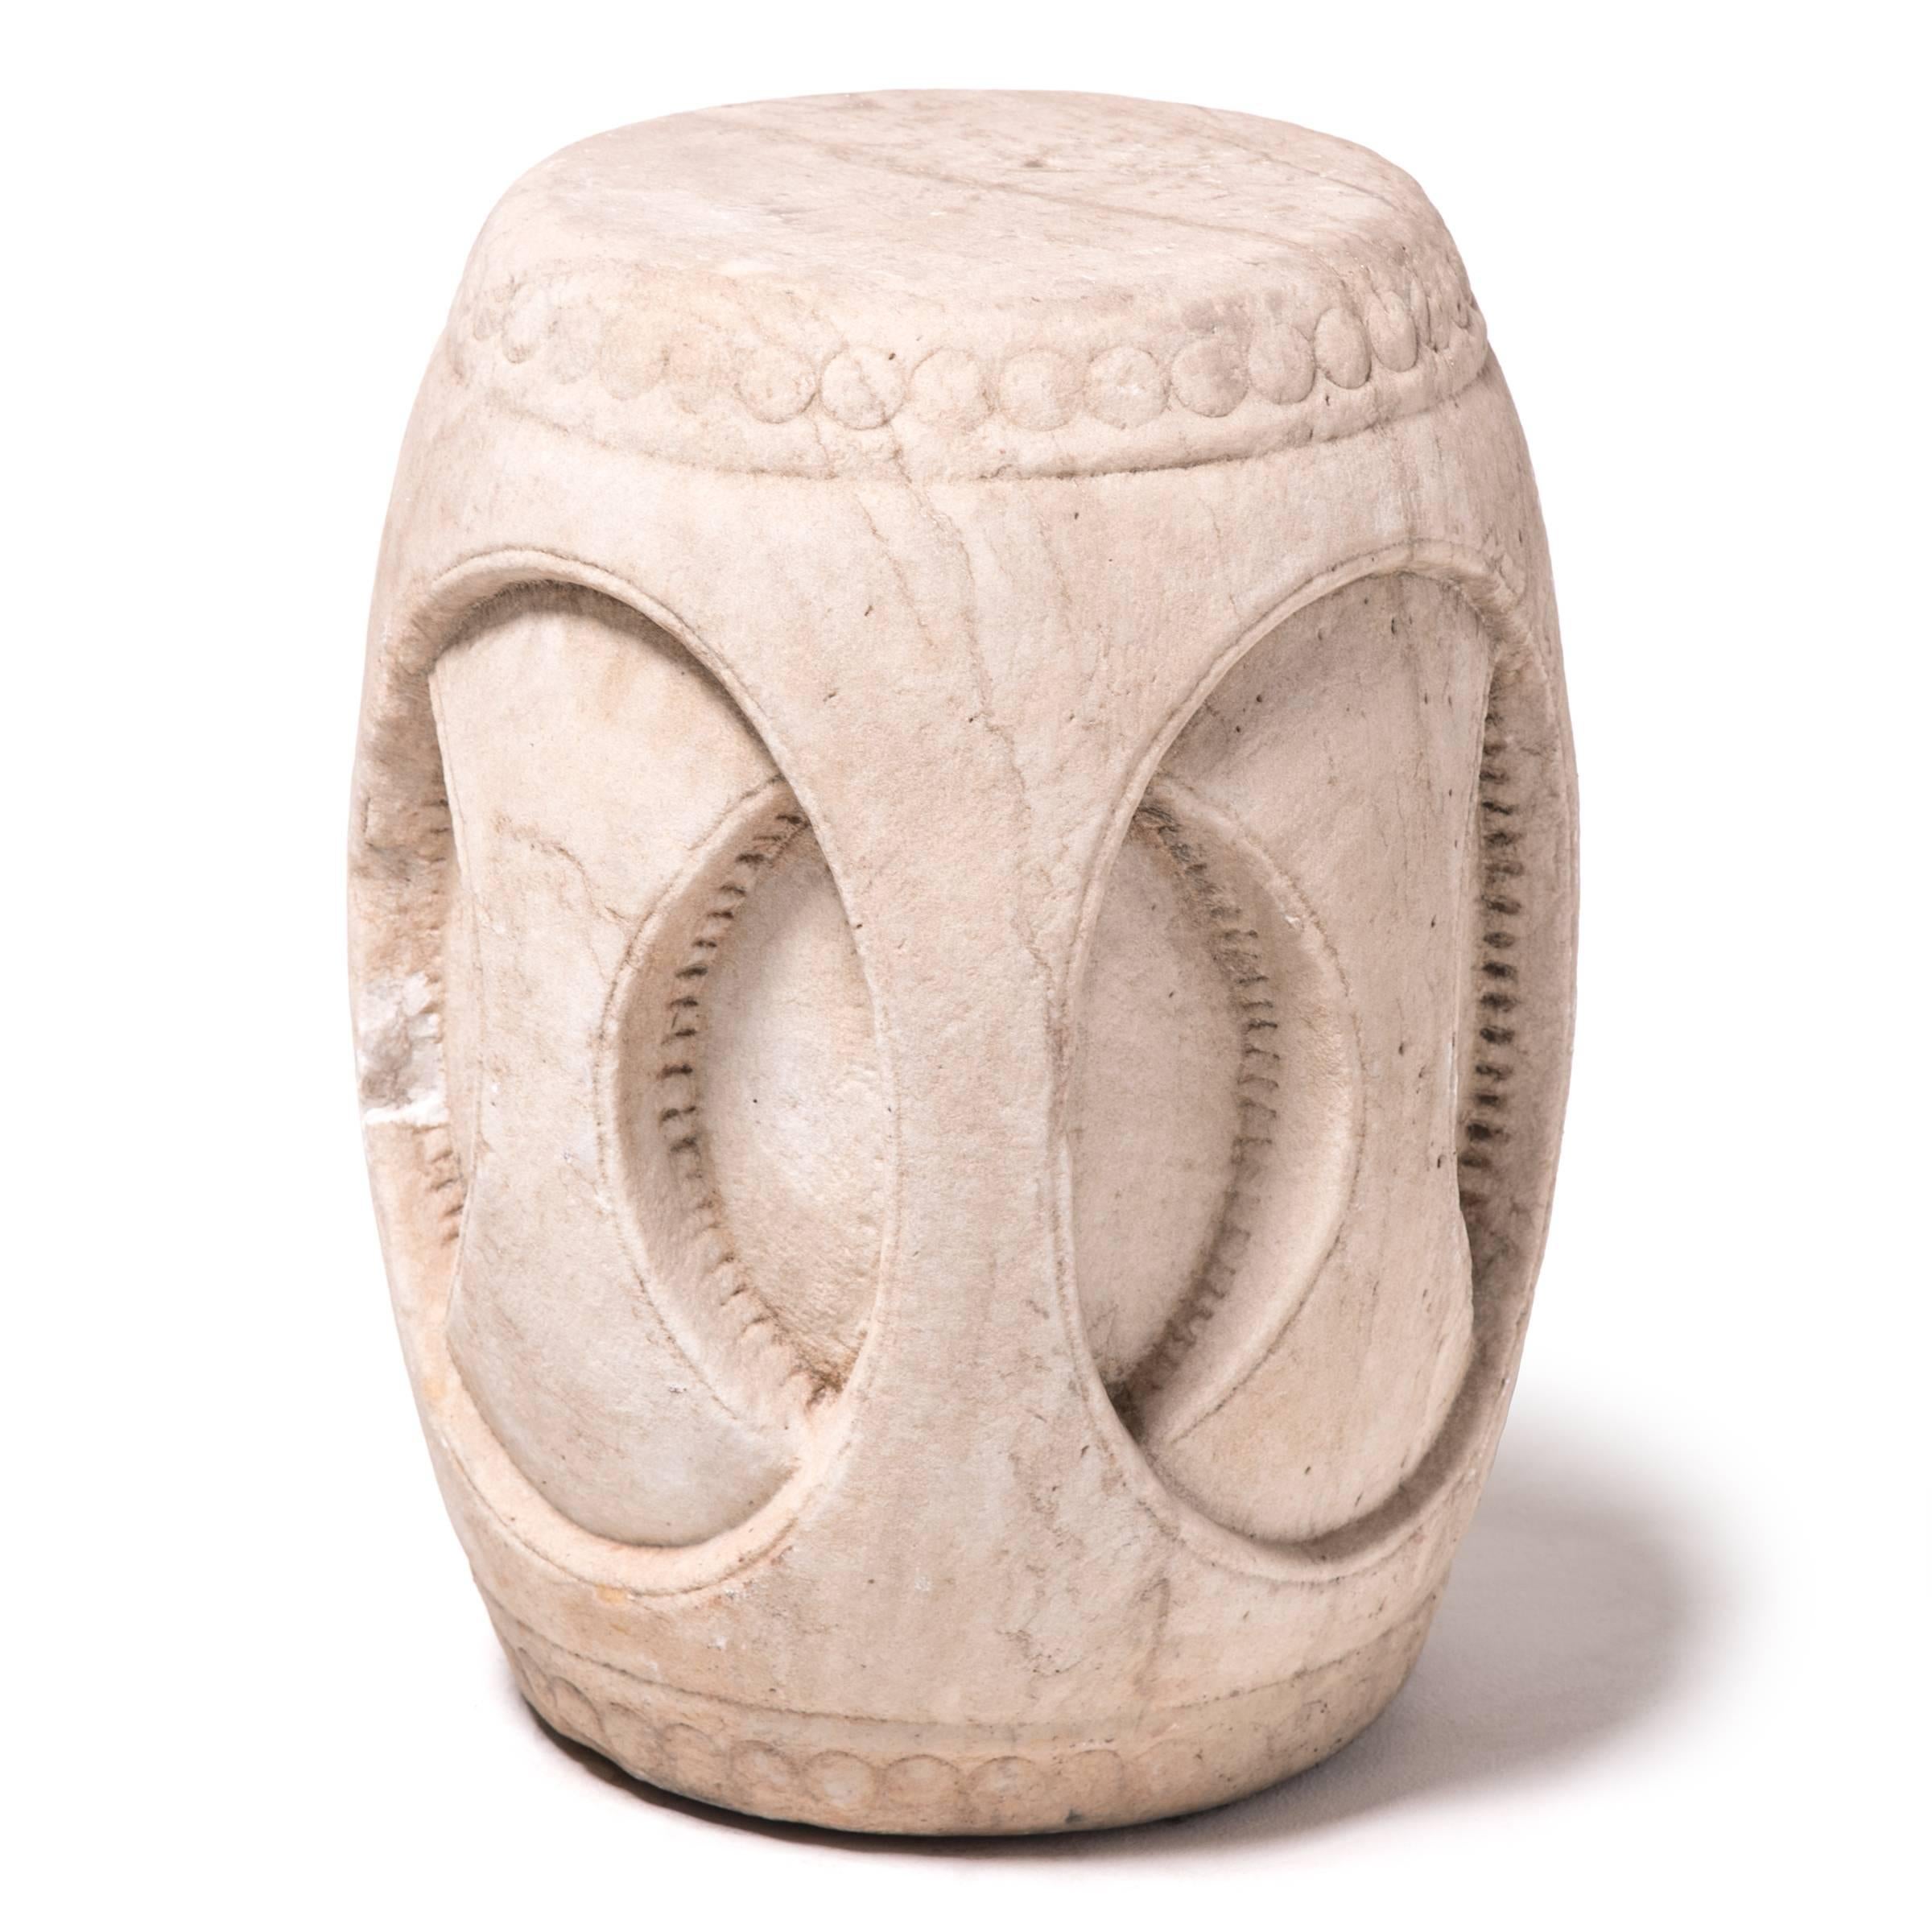 Barrel-shaped stools have been fixtures in traditional Chinese gardens since the Song dynasty. Originally made from hardwood, stools were later crafted from ceramic or stone. This intricately carved version features an incised pattern that plays